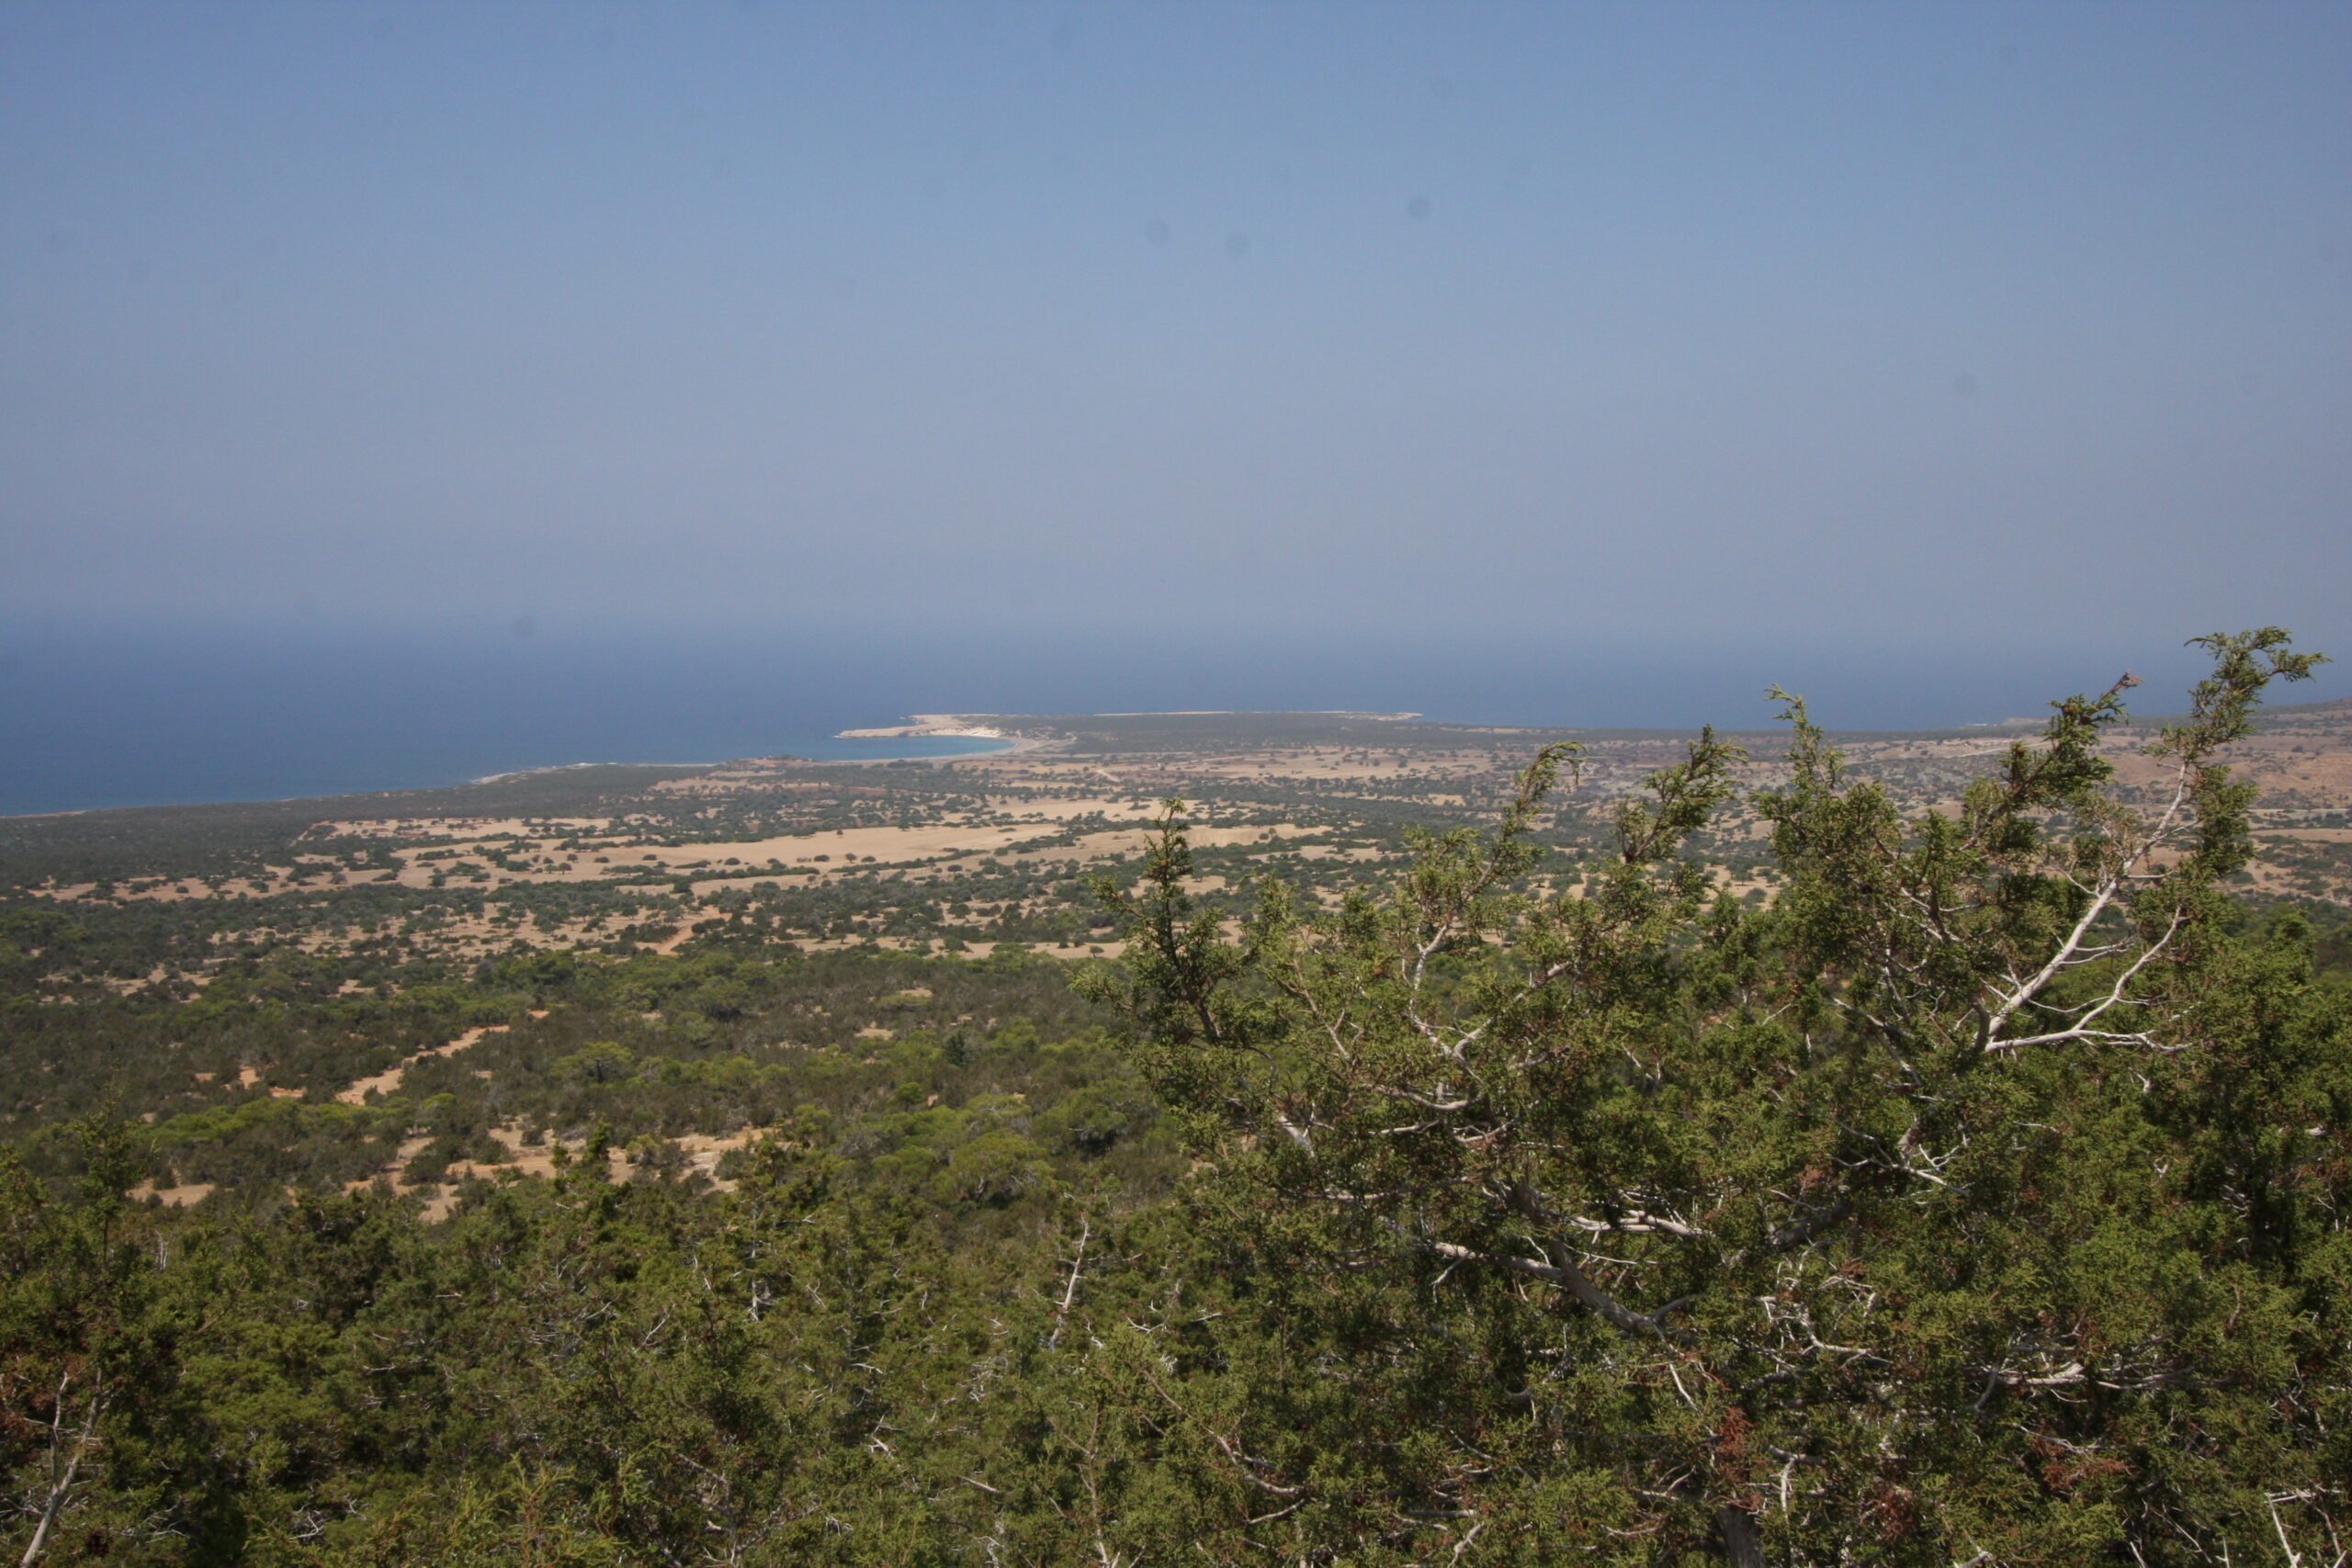 Akamas Local Plan: There is still hope for Akamas – The worst has been prevented